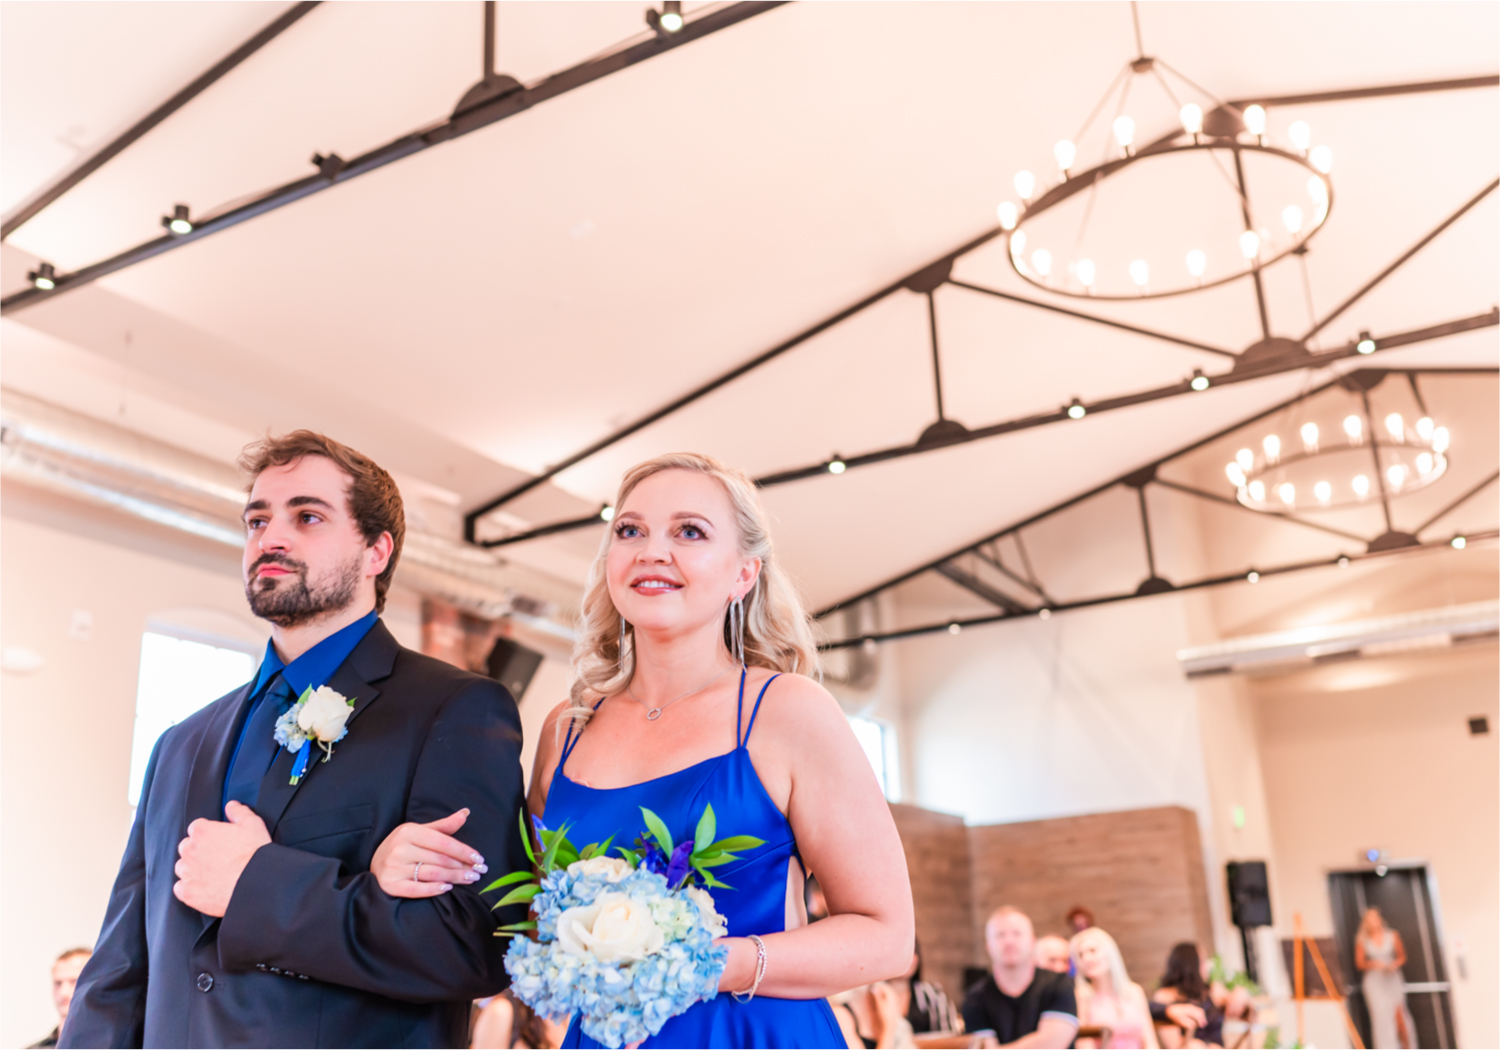 Romantic and Rustic Wedding at The Mill in Windsor | Britni Girard Photography | Colorado based wedding photography and videography team | Royal Blue and white Wedding